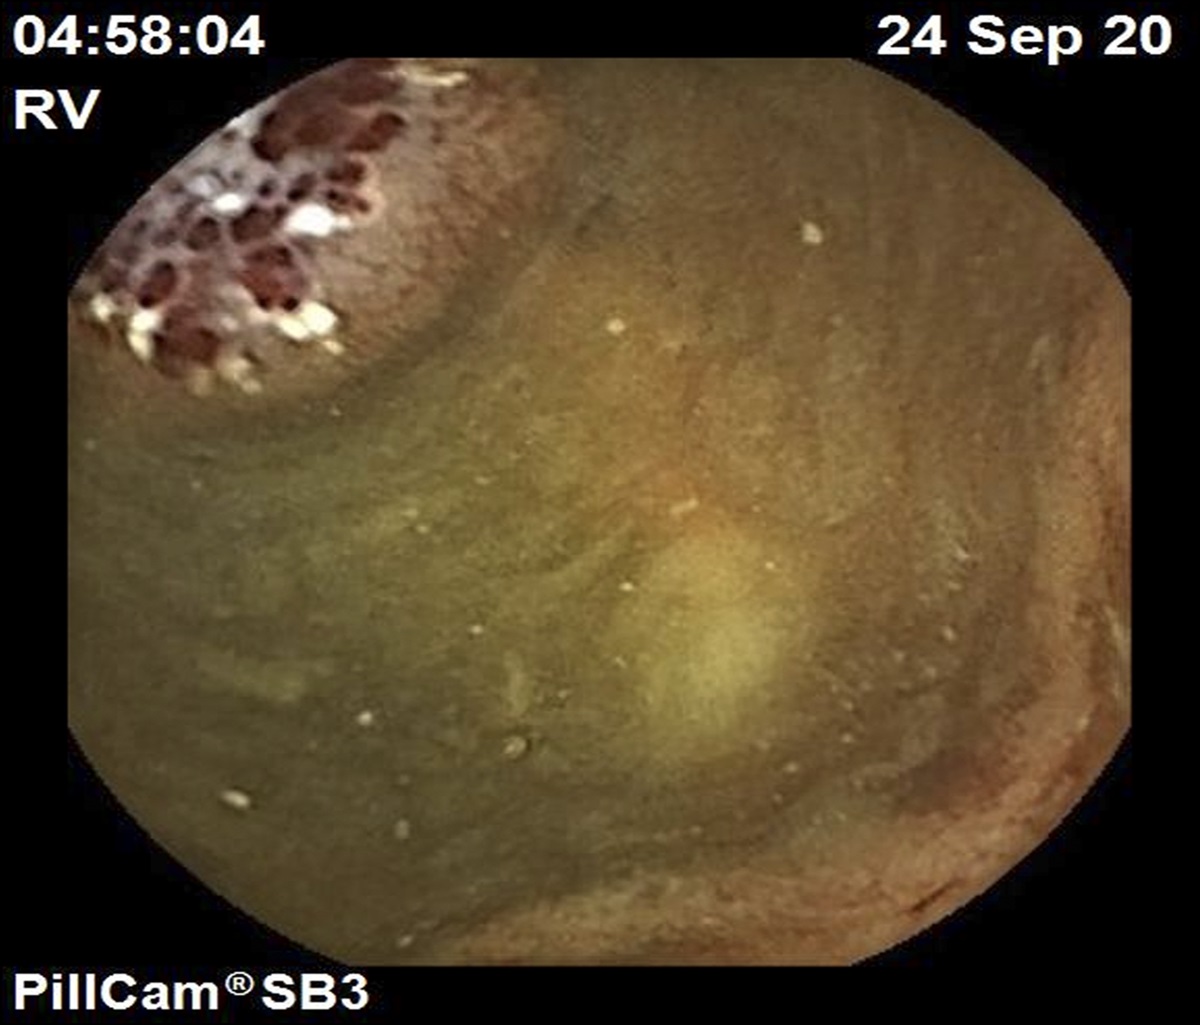 Single-Balloon-Assisted Enteroscopy With Endoscopic Mucosal Resection of a Bleeding Jejunal Lymphangioma